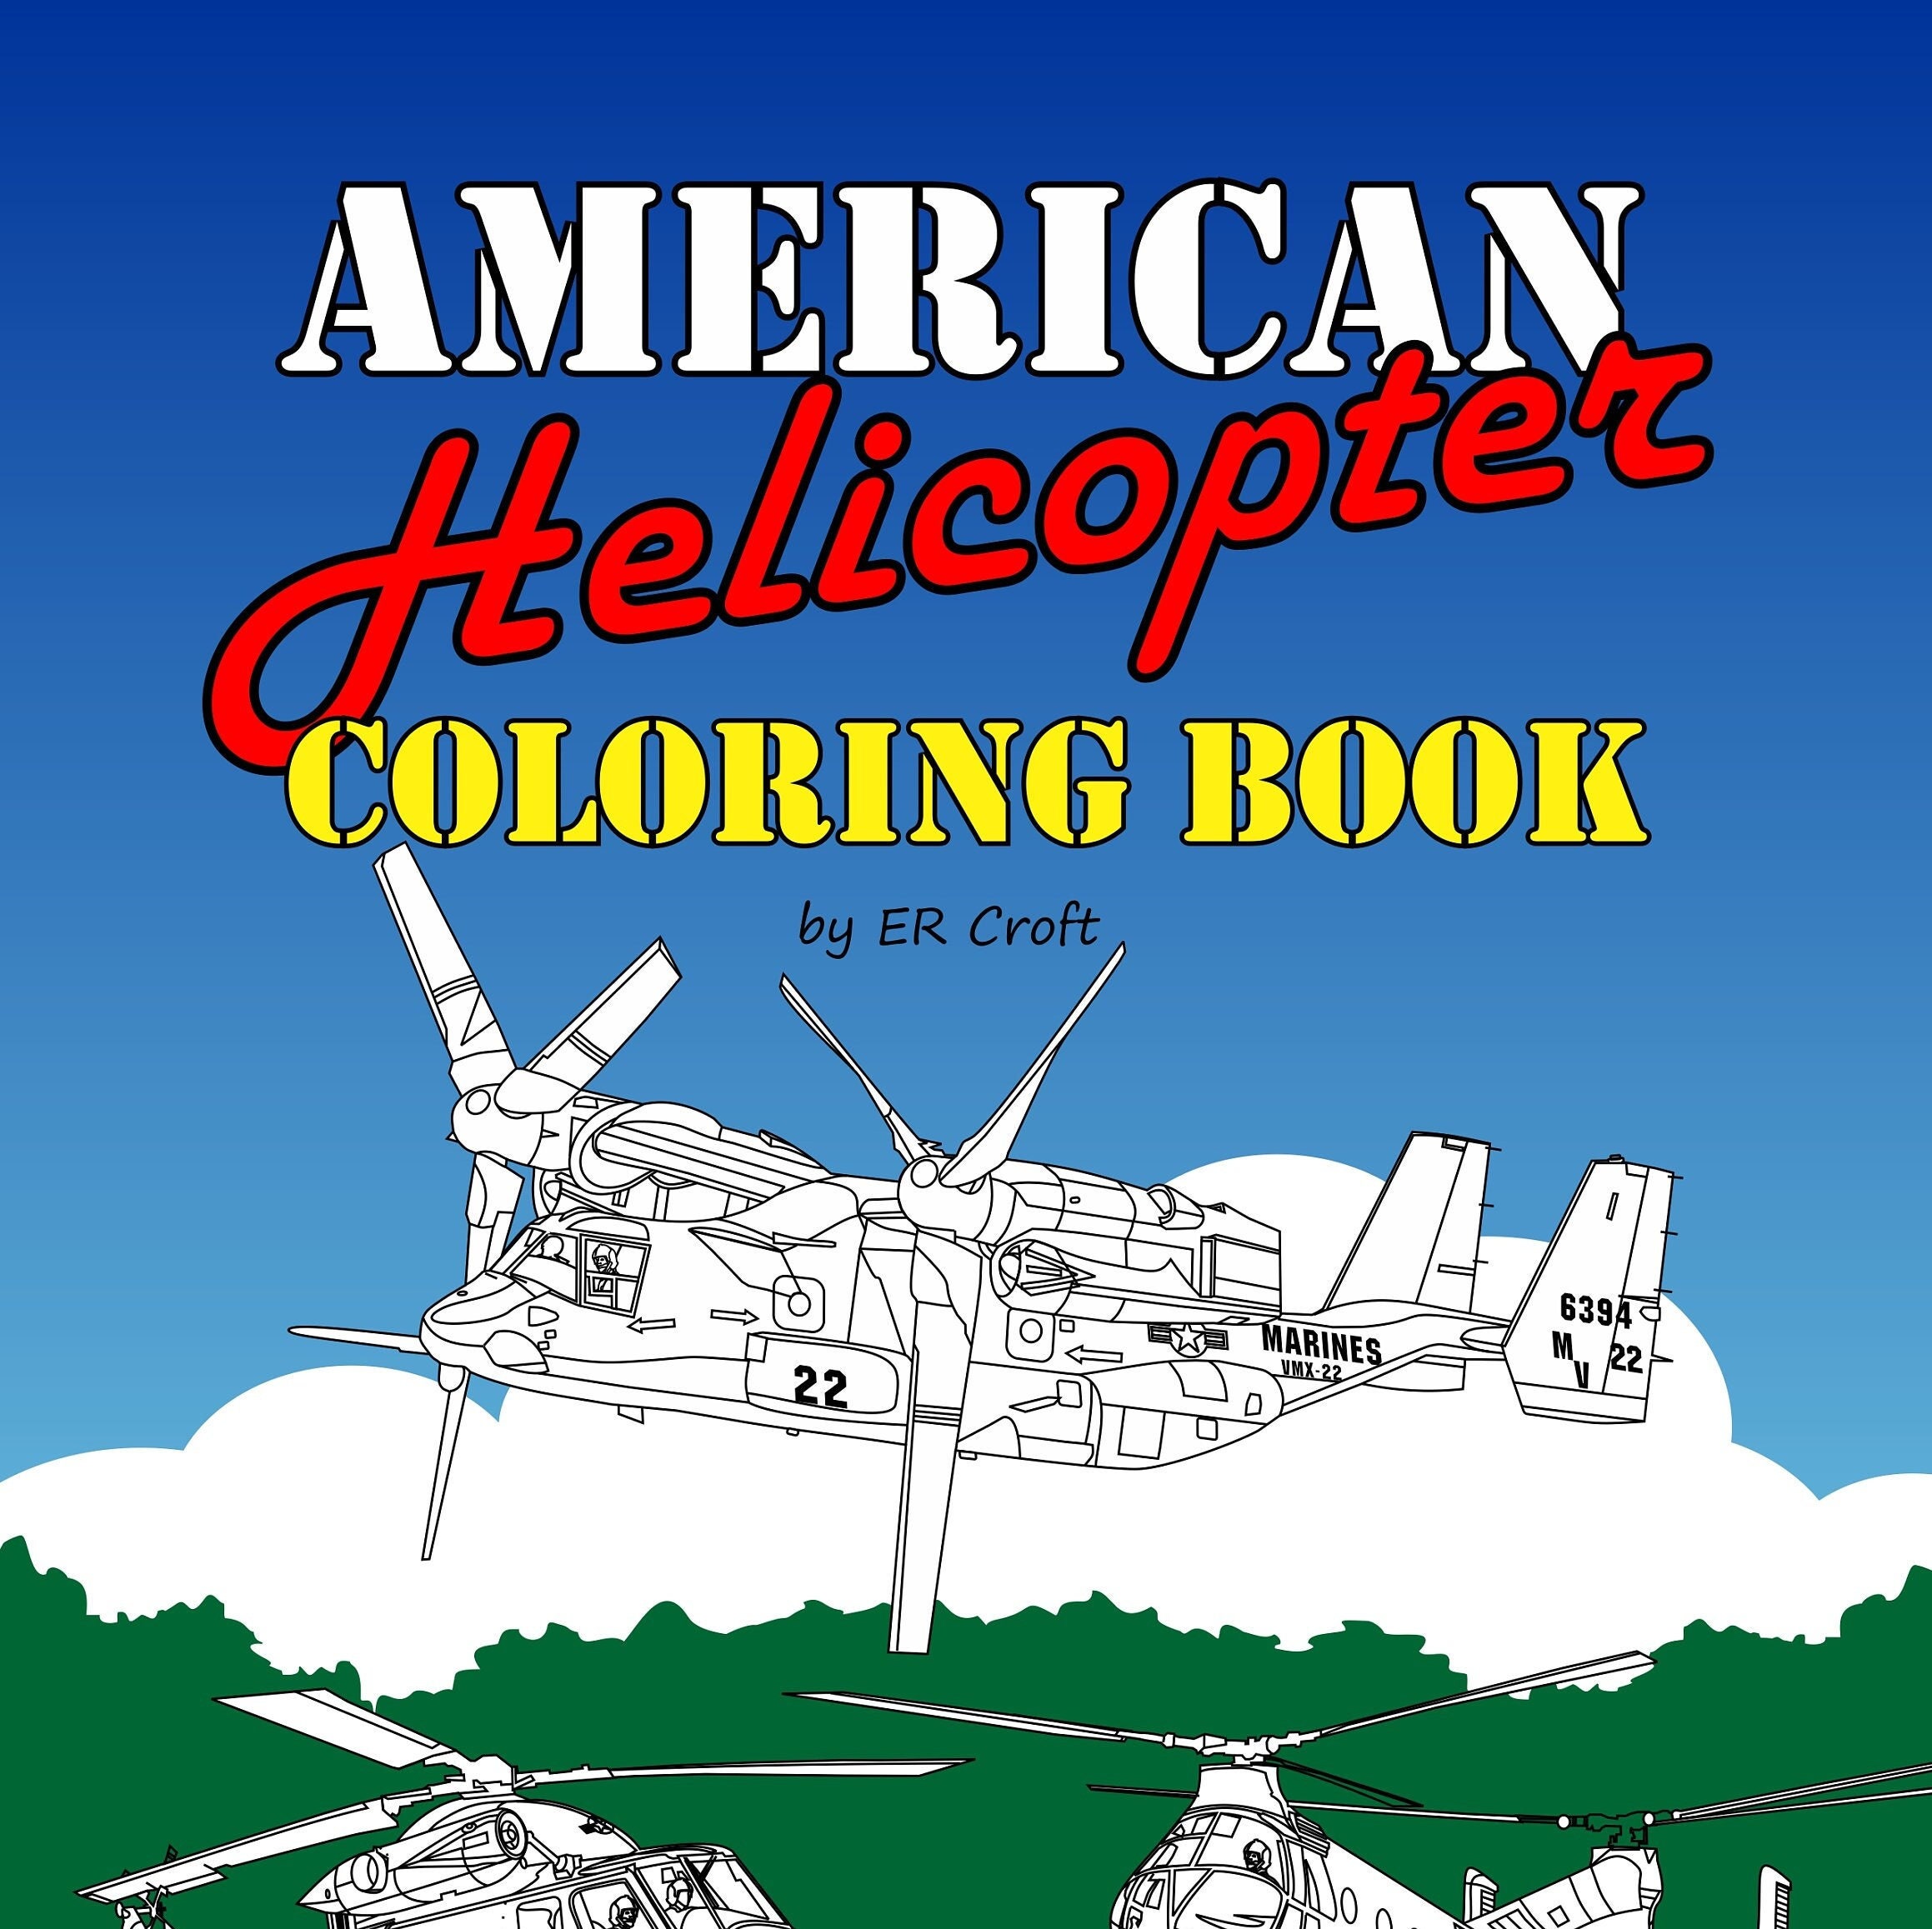 American helicopters coloring book series